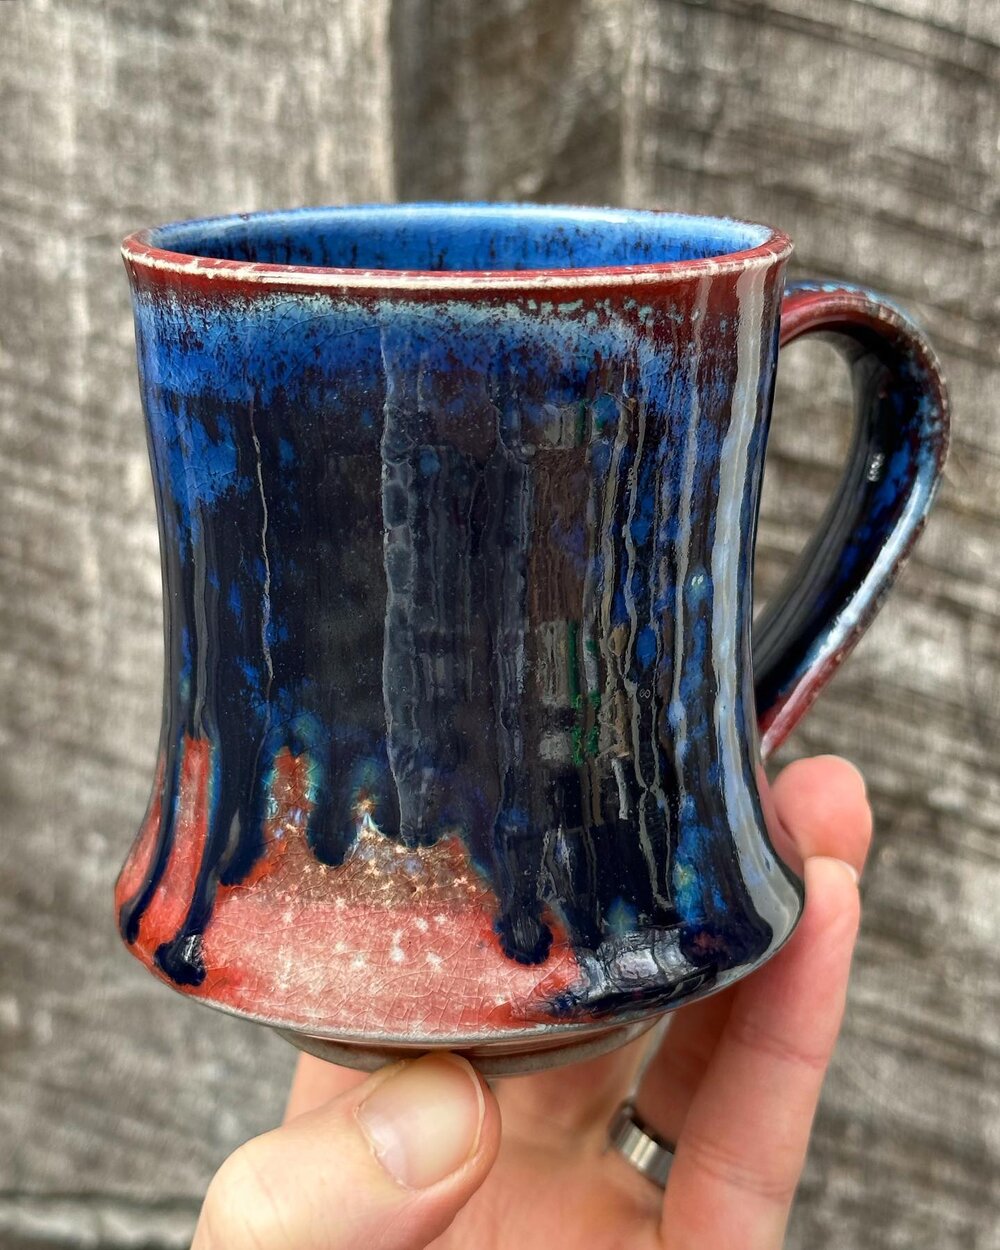 Reds and blues. Celebrate the US advancing to the next round of the World Cup, if you like. Or just snag a new mug. My annual holiday sale is live at TrevorClayworks.com